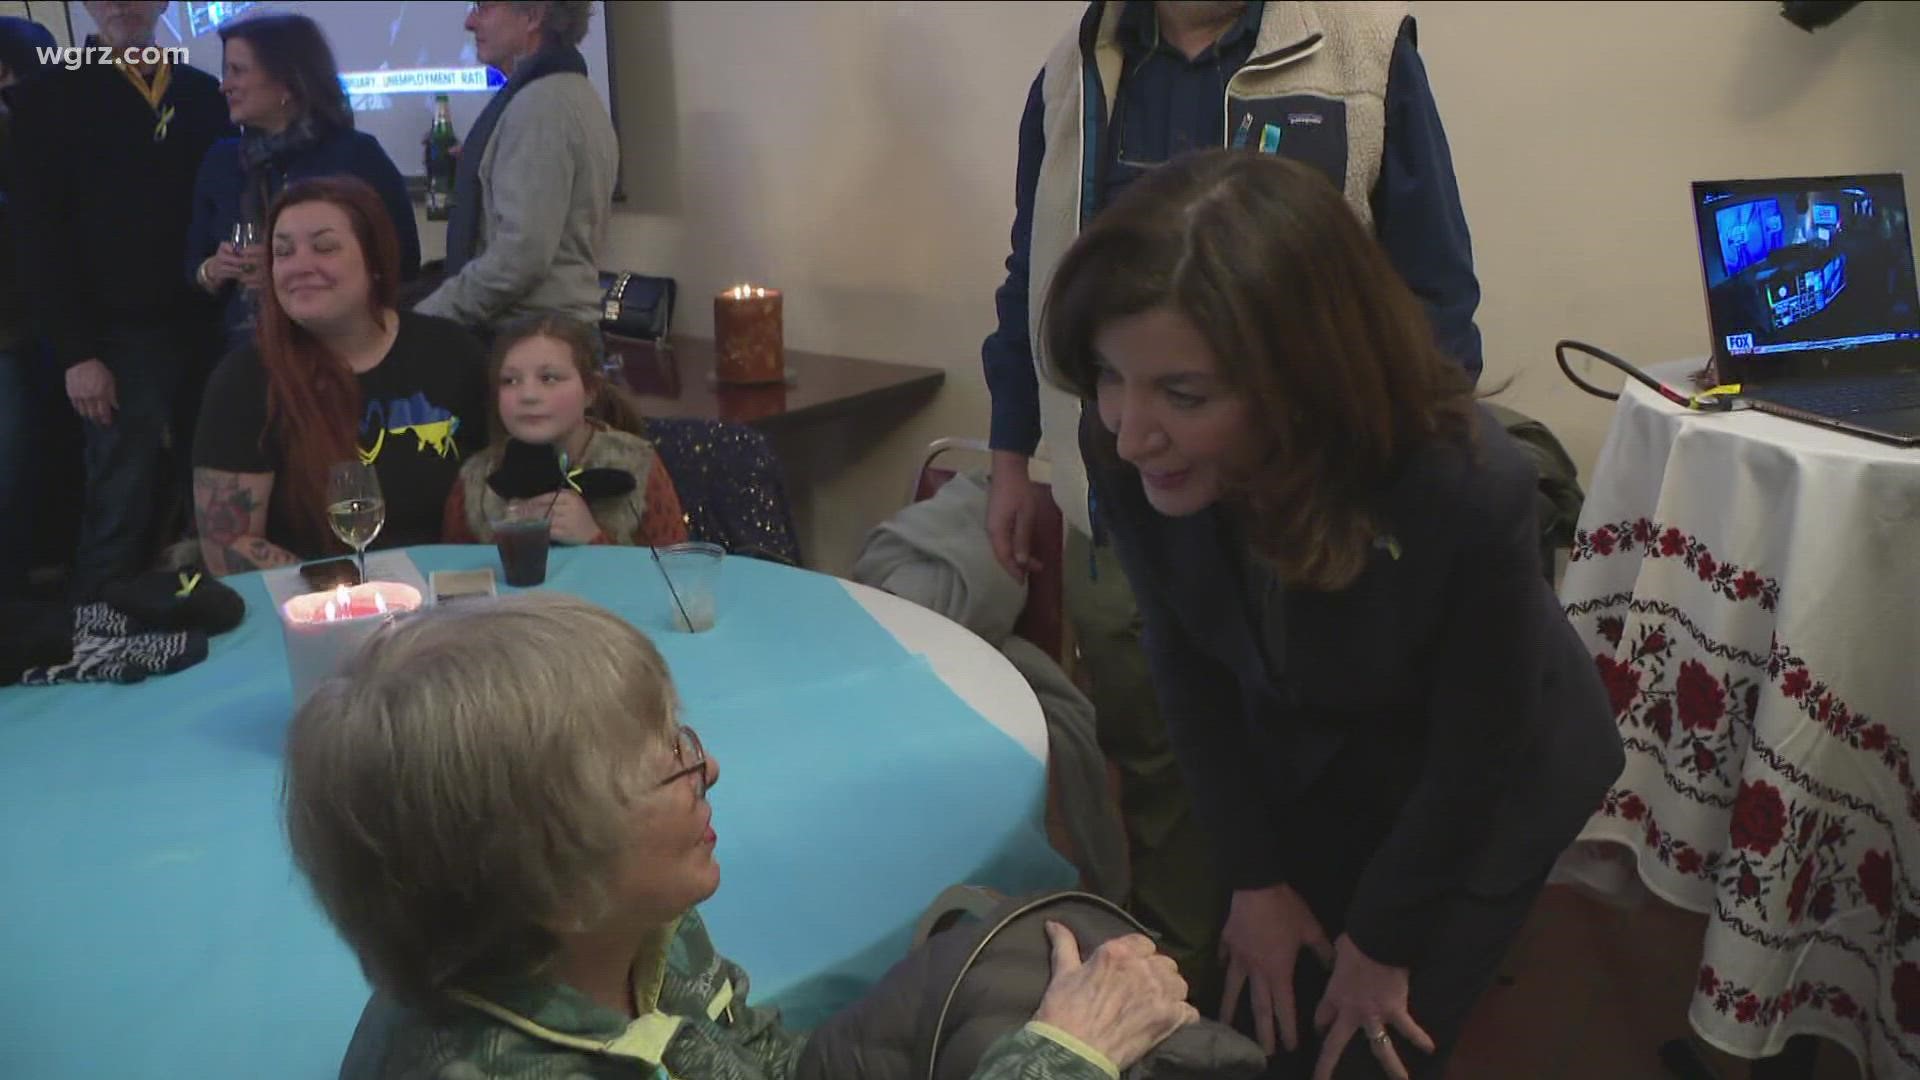 Hochul stopped by the center Friday night, to offer some words of encouragement for local Ukrainian families.